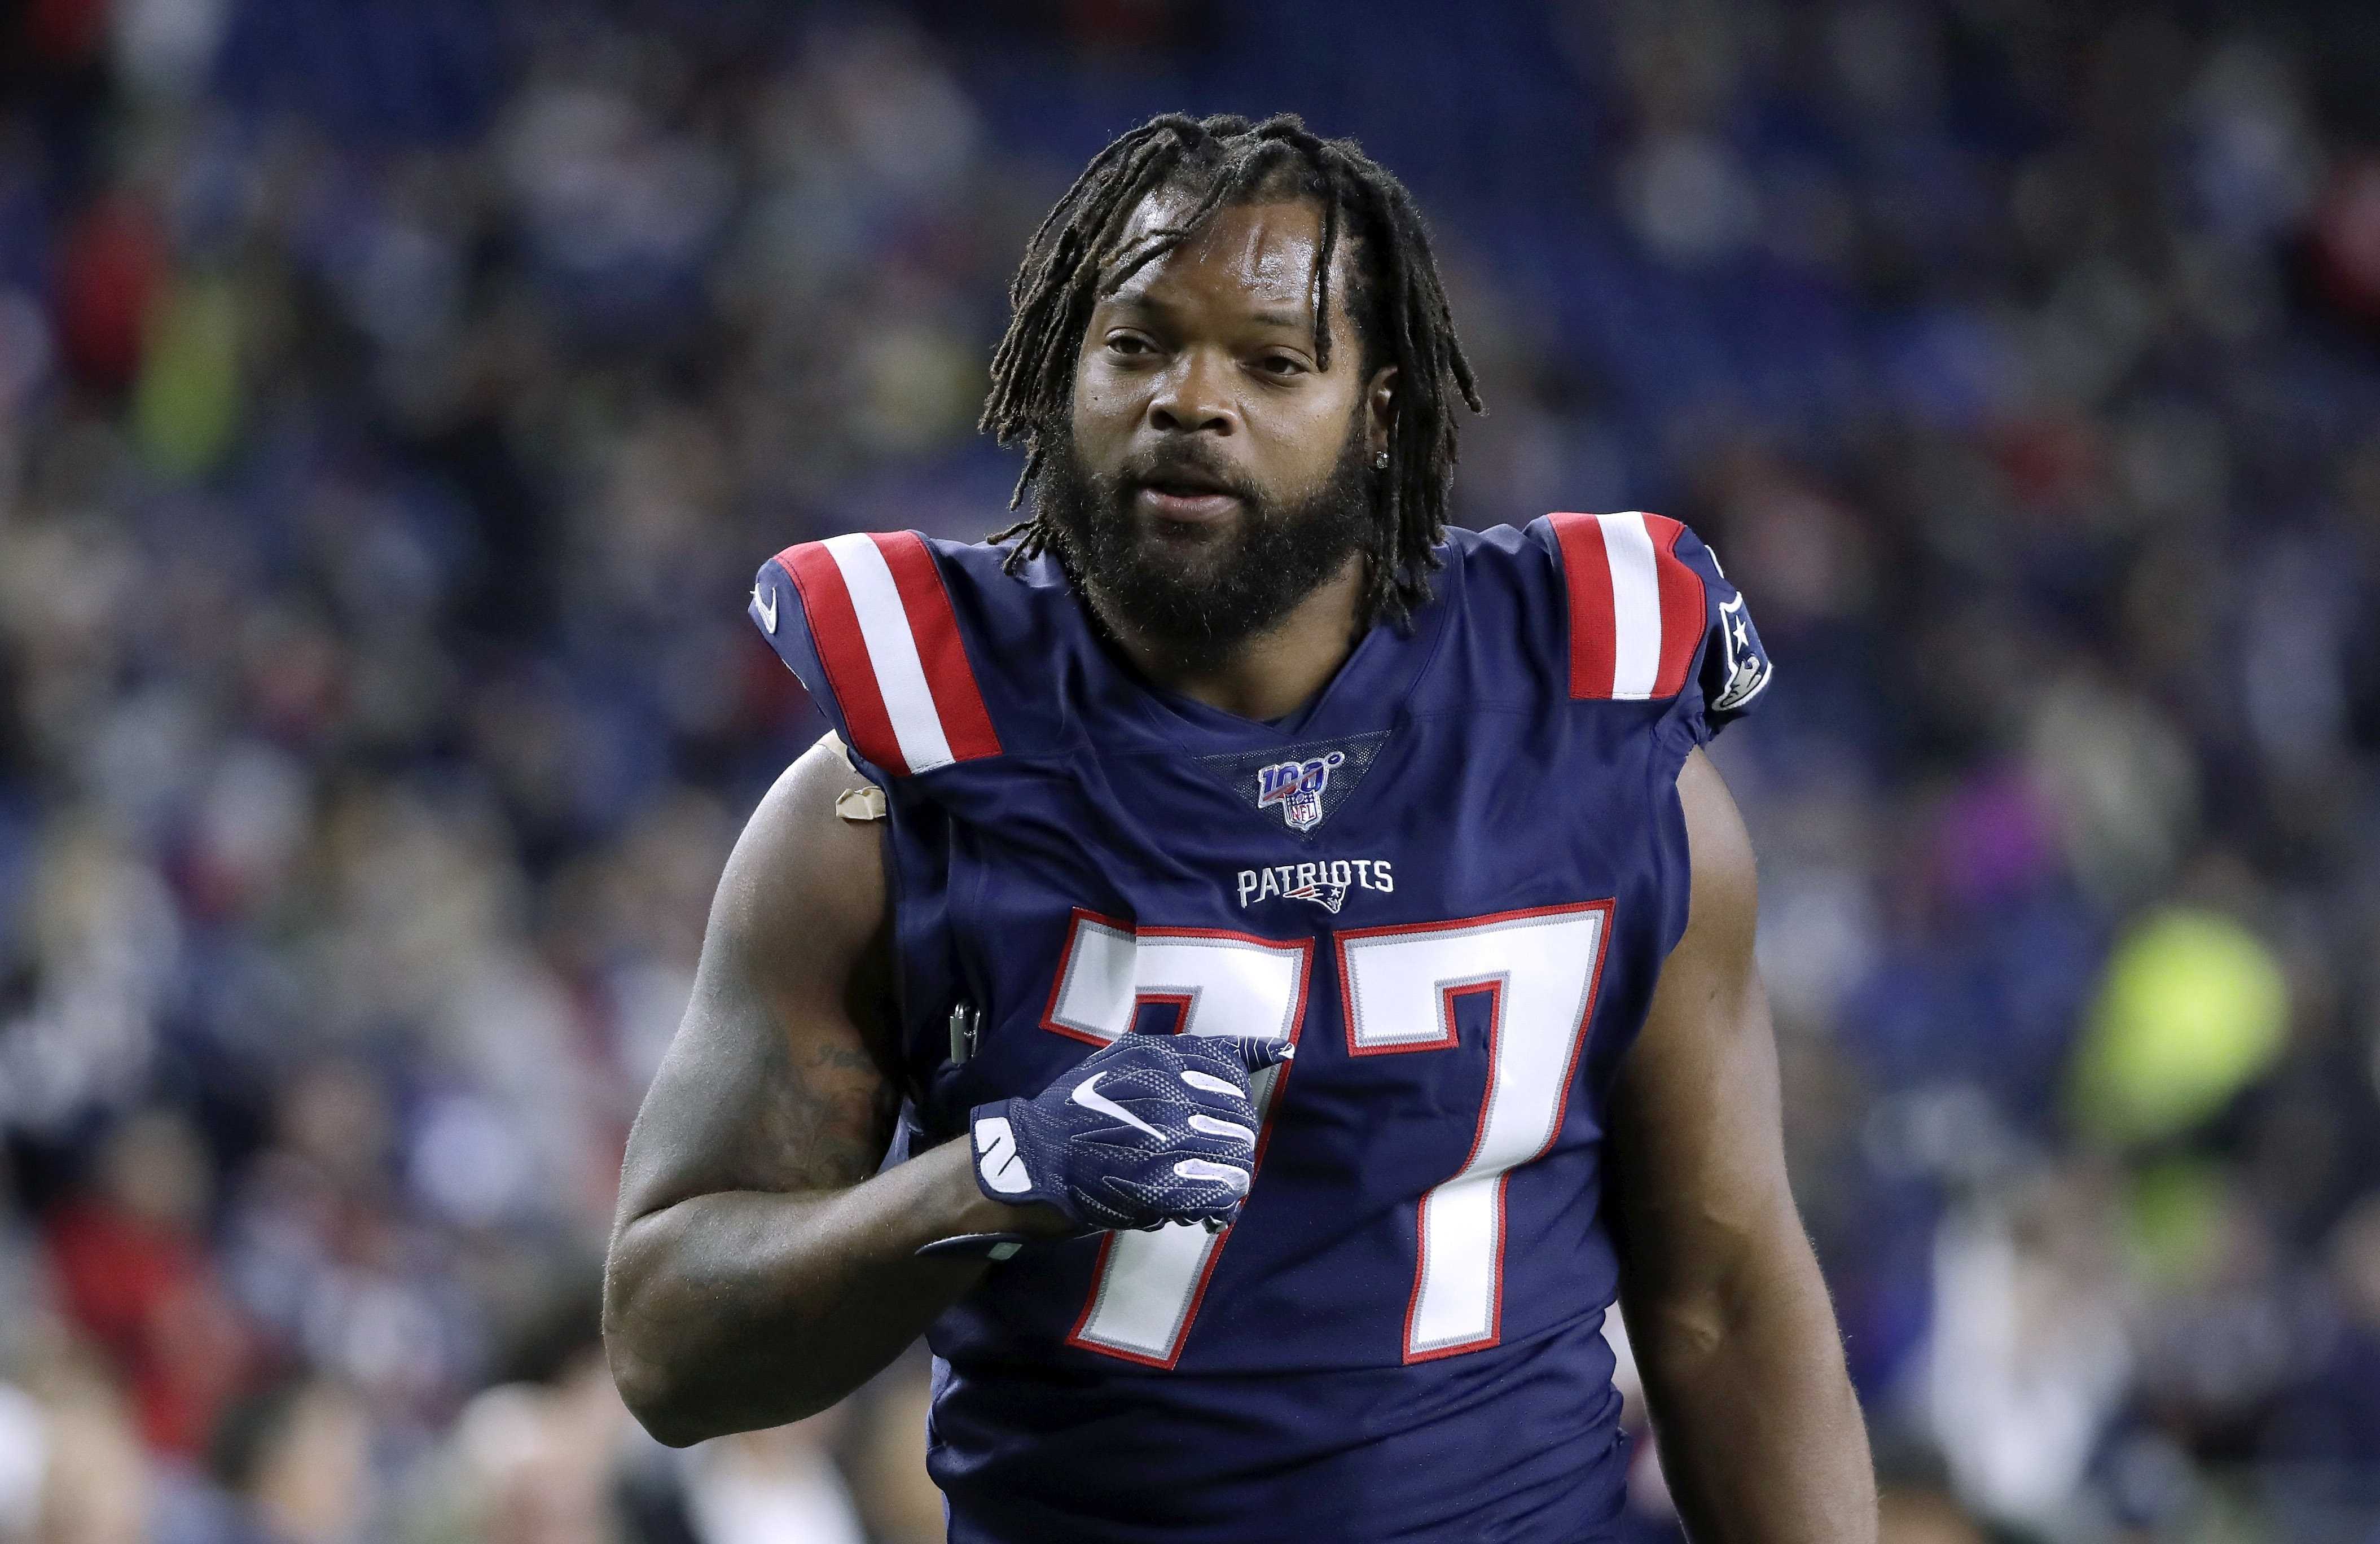 Days after suspension, Patriots trading defensive player Michael ...